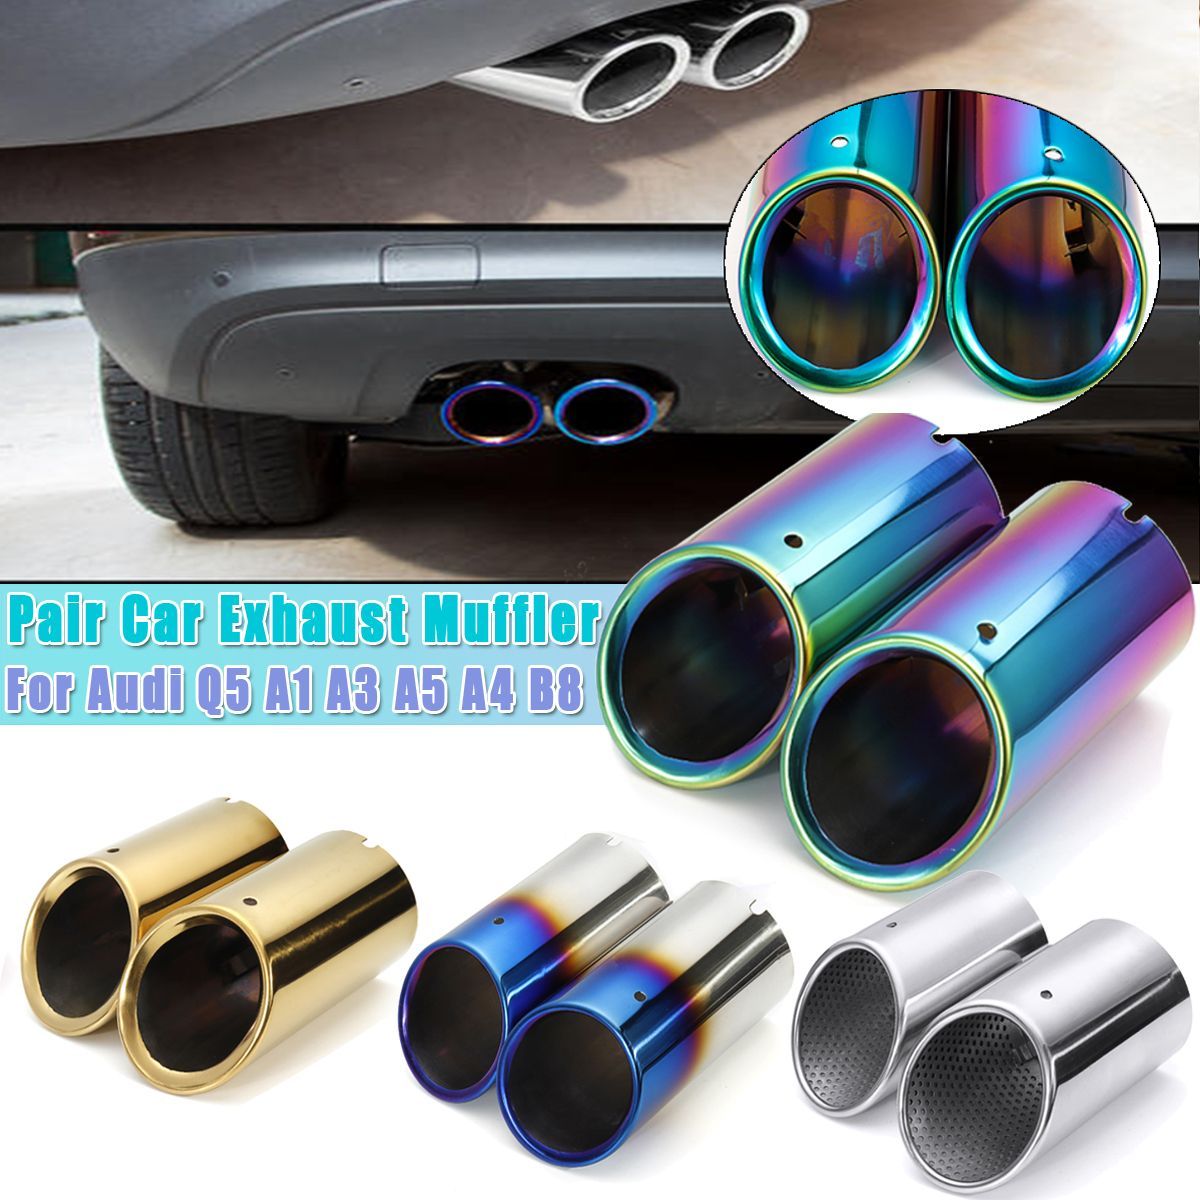 Stainless-Steel-Car-Exhaust-Muffler-Tail-Pipe-Tip-Pair-For-Audi-Q5-A1-A3-A5-A4-B8-1687657